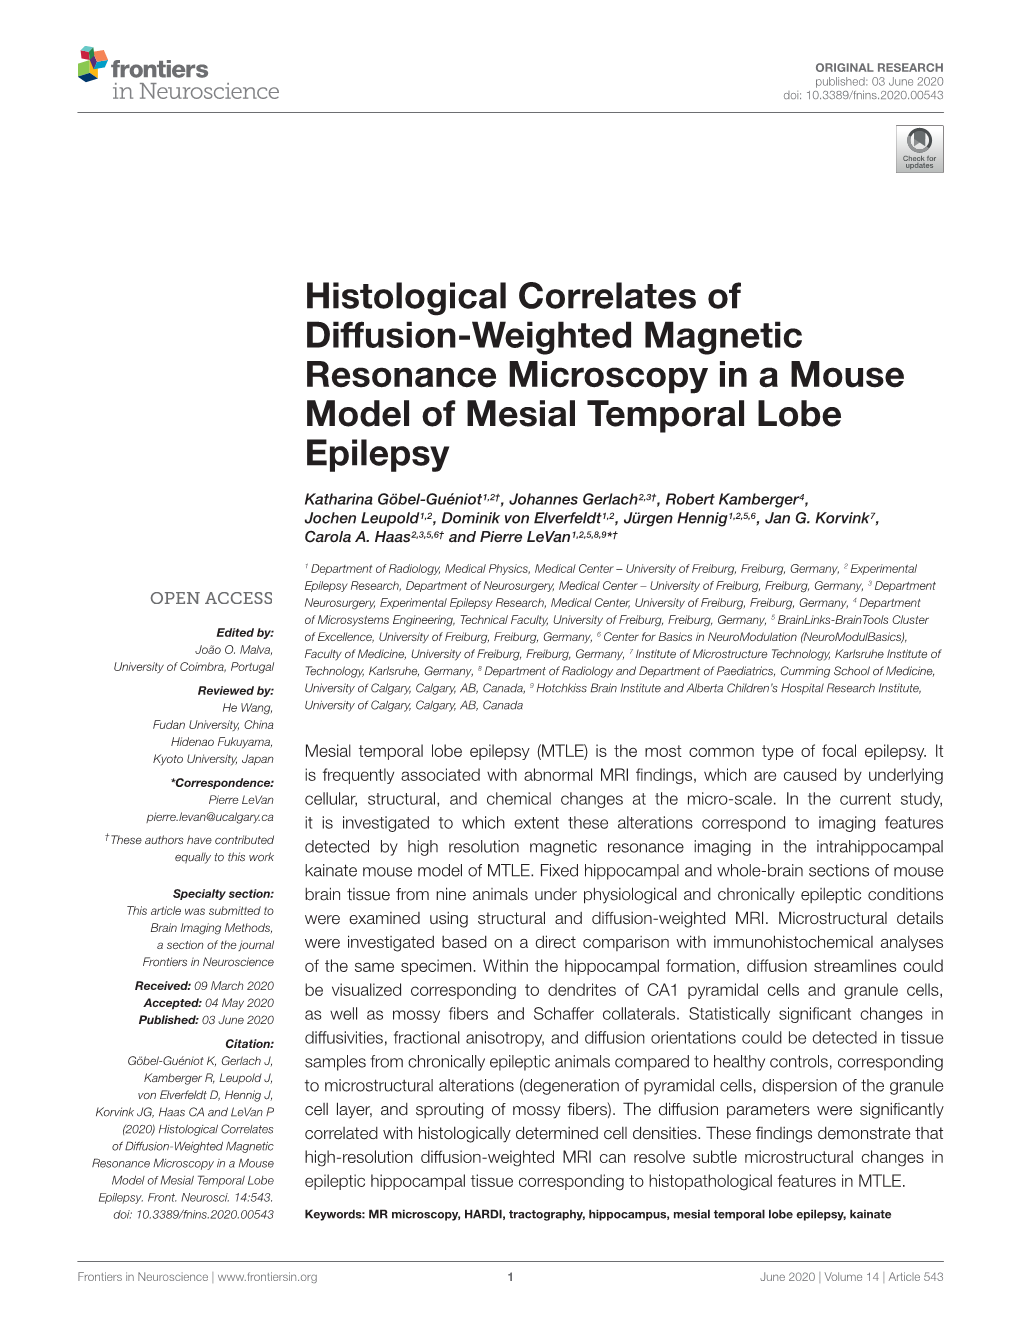 Histological Correlates of Diffusion-Weighted Magnetic Resonance Microscopy in a Mouse Model of Mesial Temporal Lobe Epilepsy